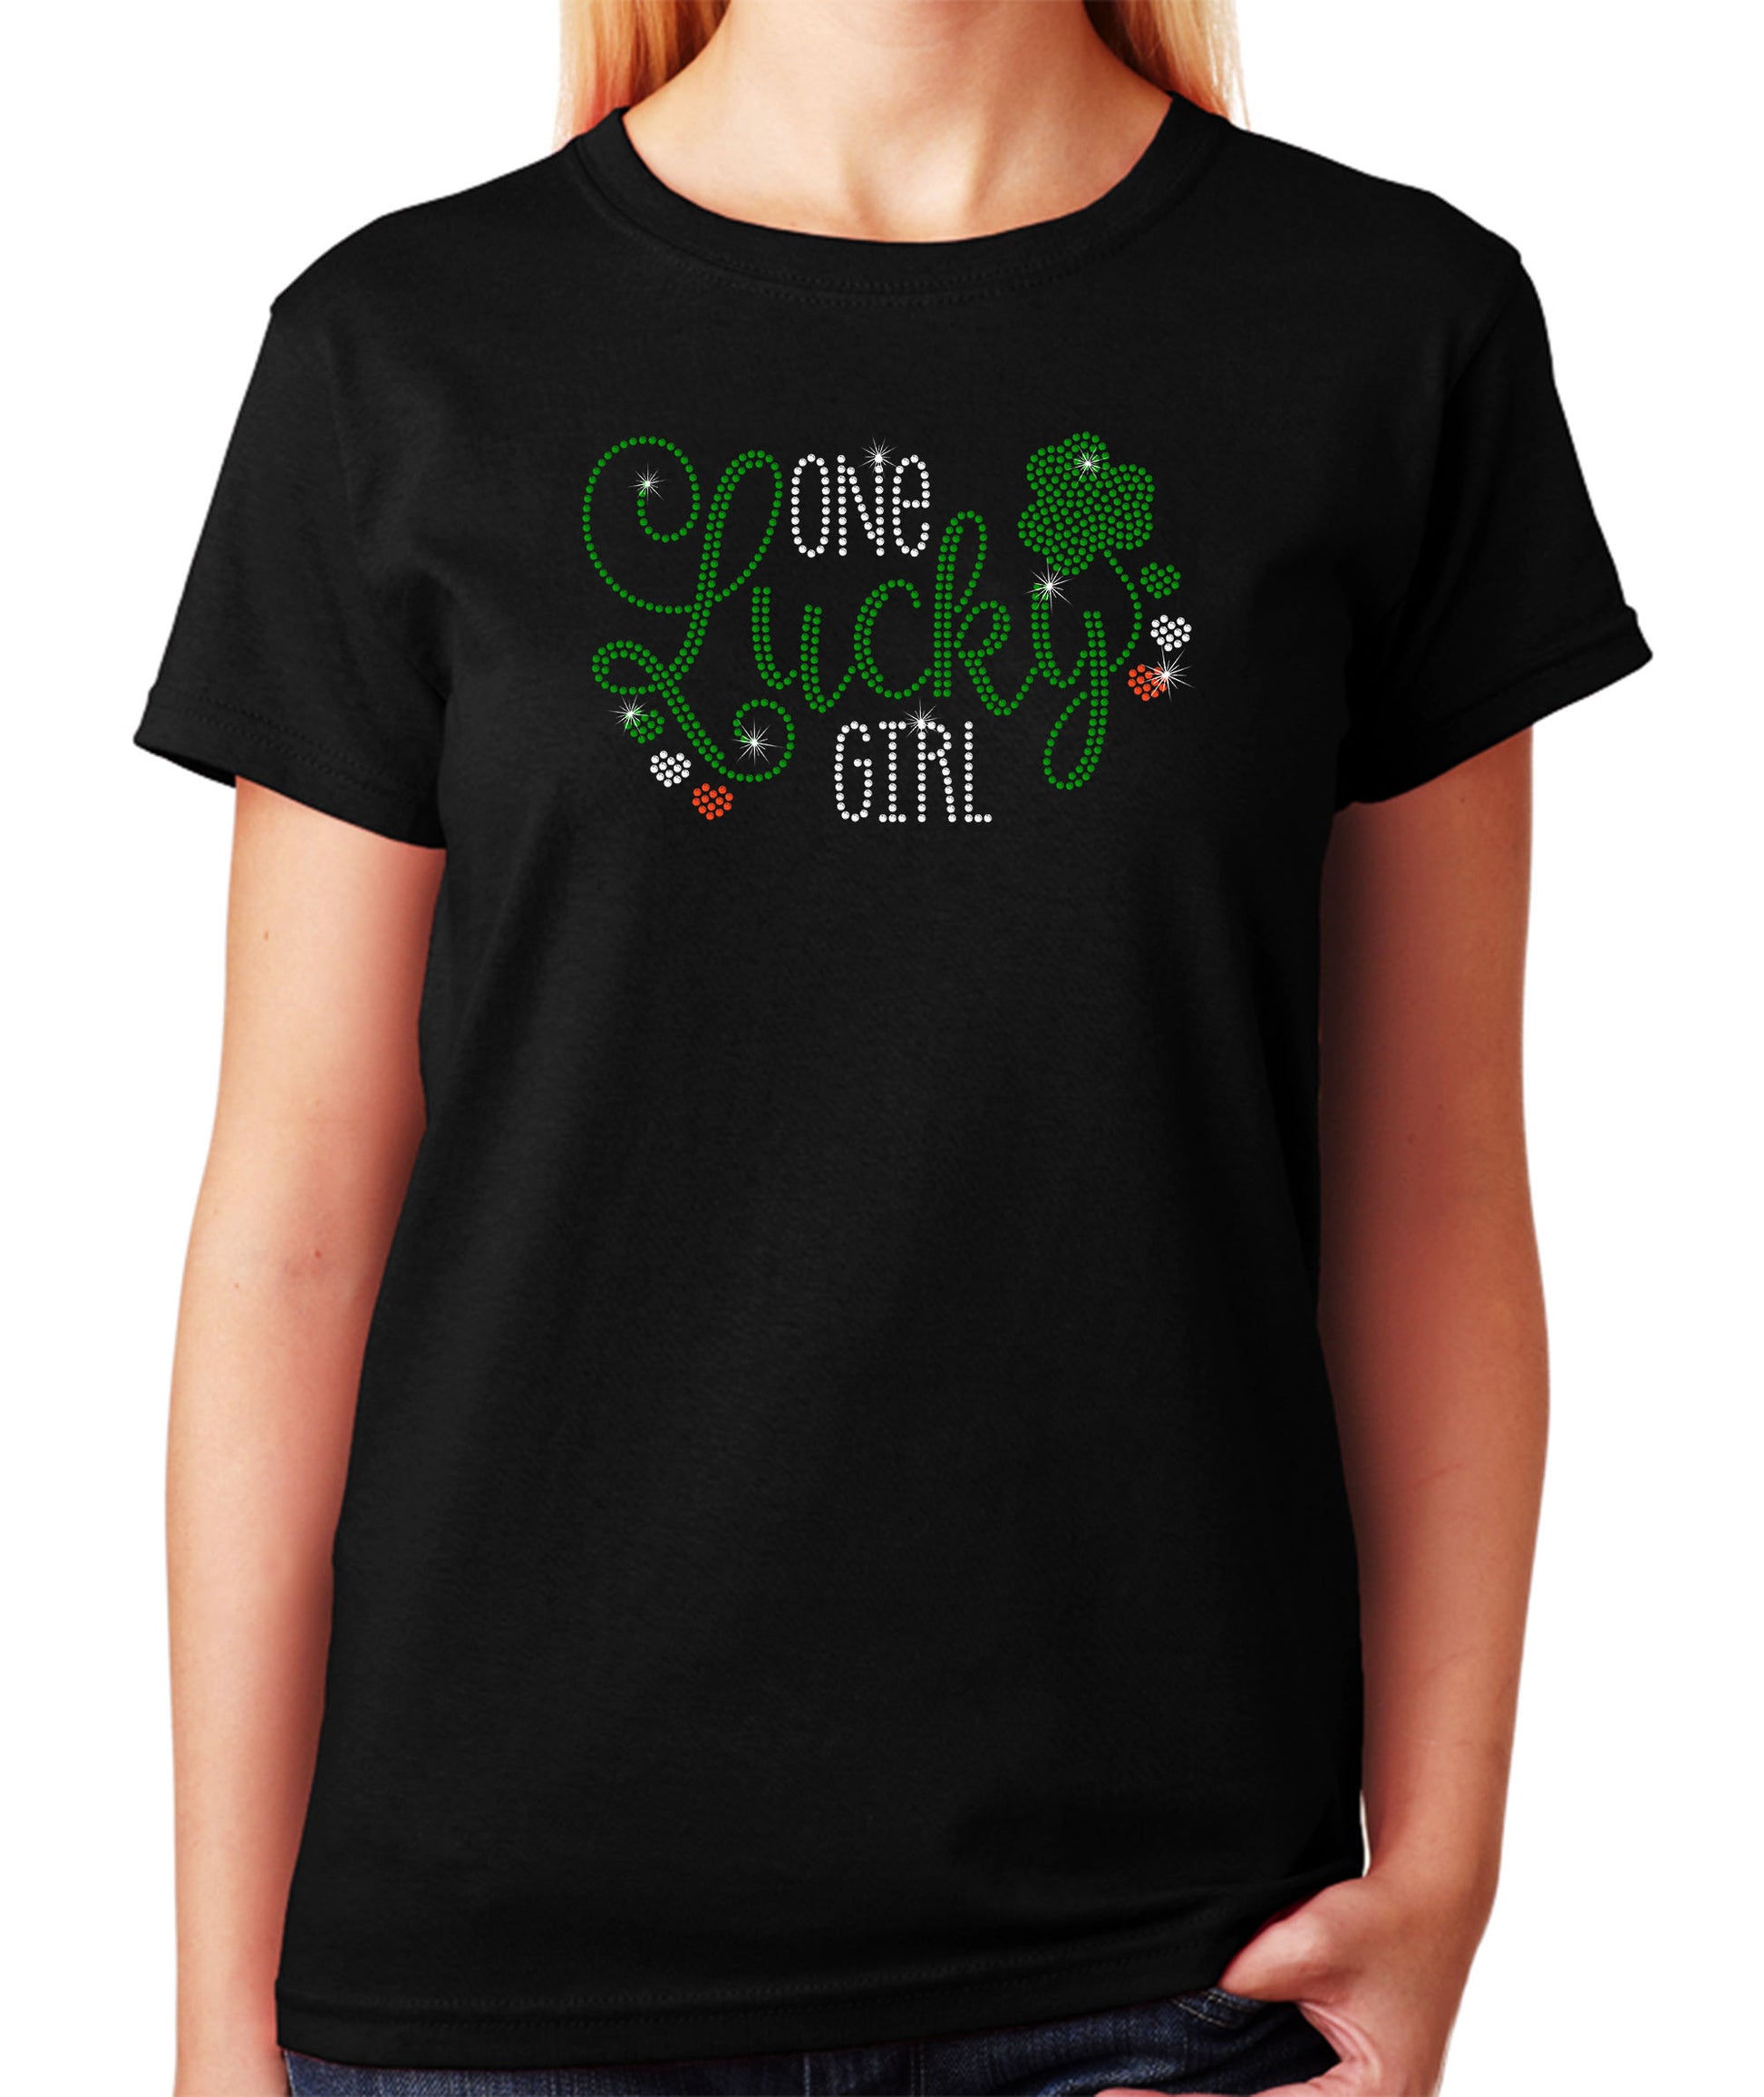 One Lucky Girl with Clover - St. Patrics Day Shirt